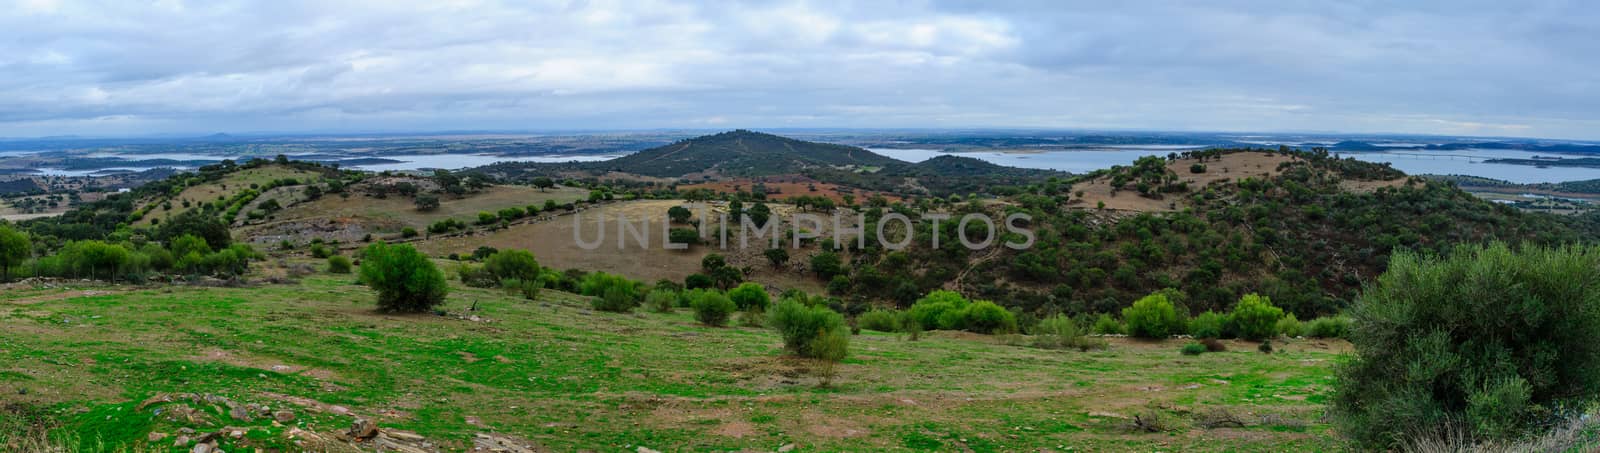 Panoramic view over Alqueva Lake from Monsaraz, Portugal